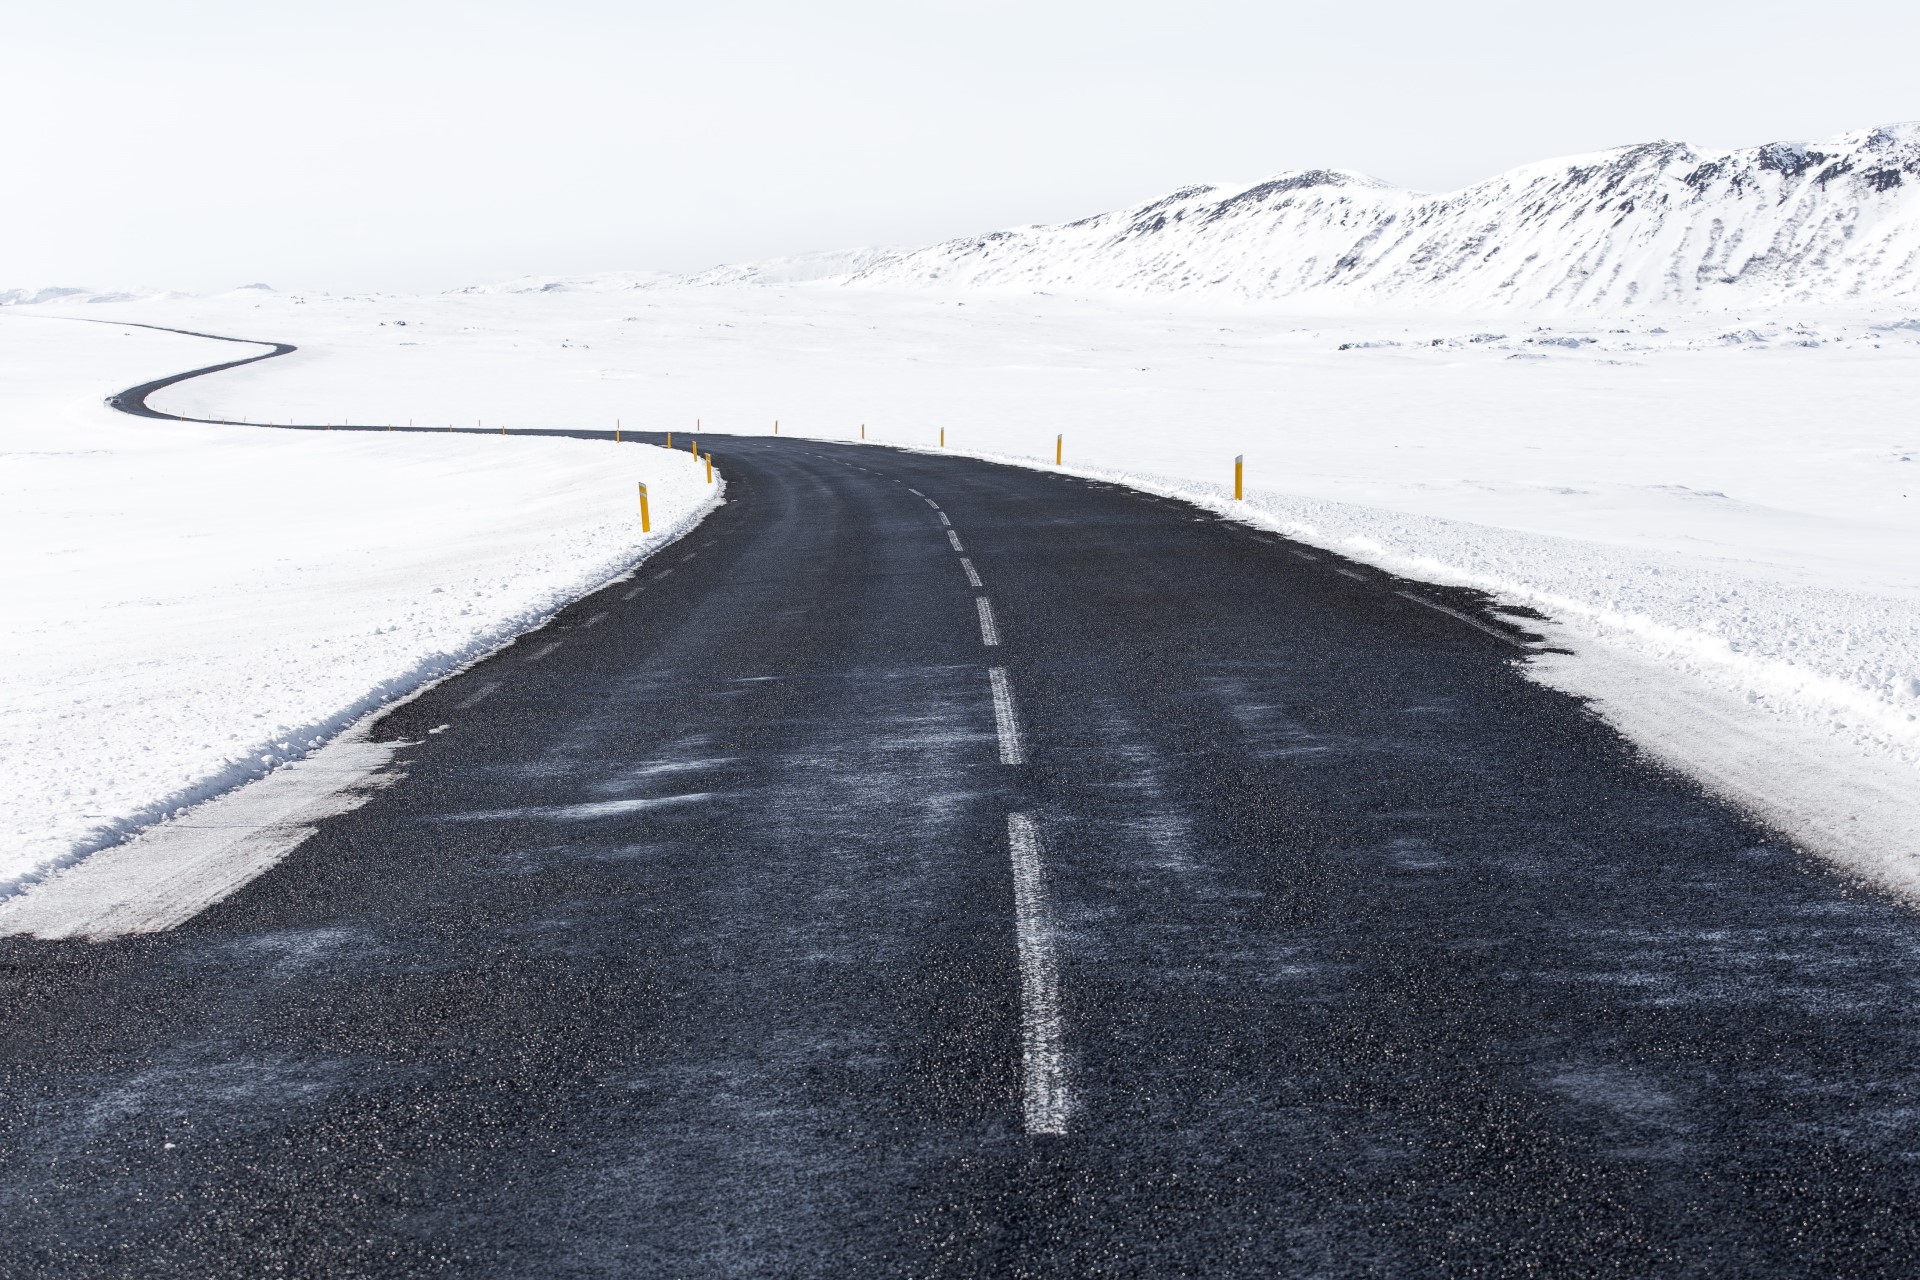 An icy road with curves ahead.